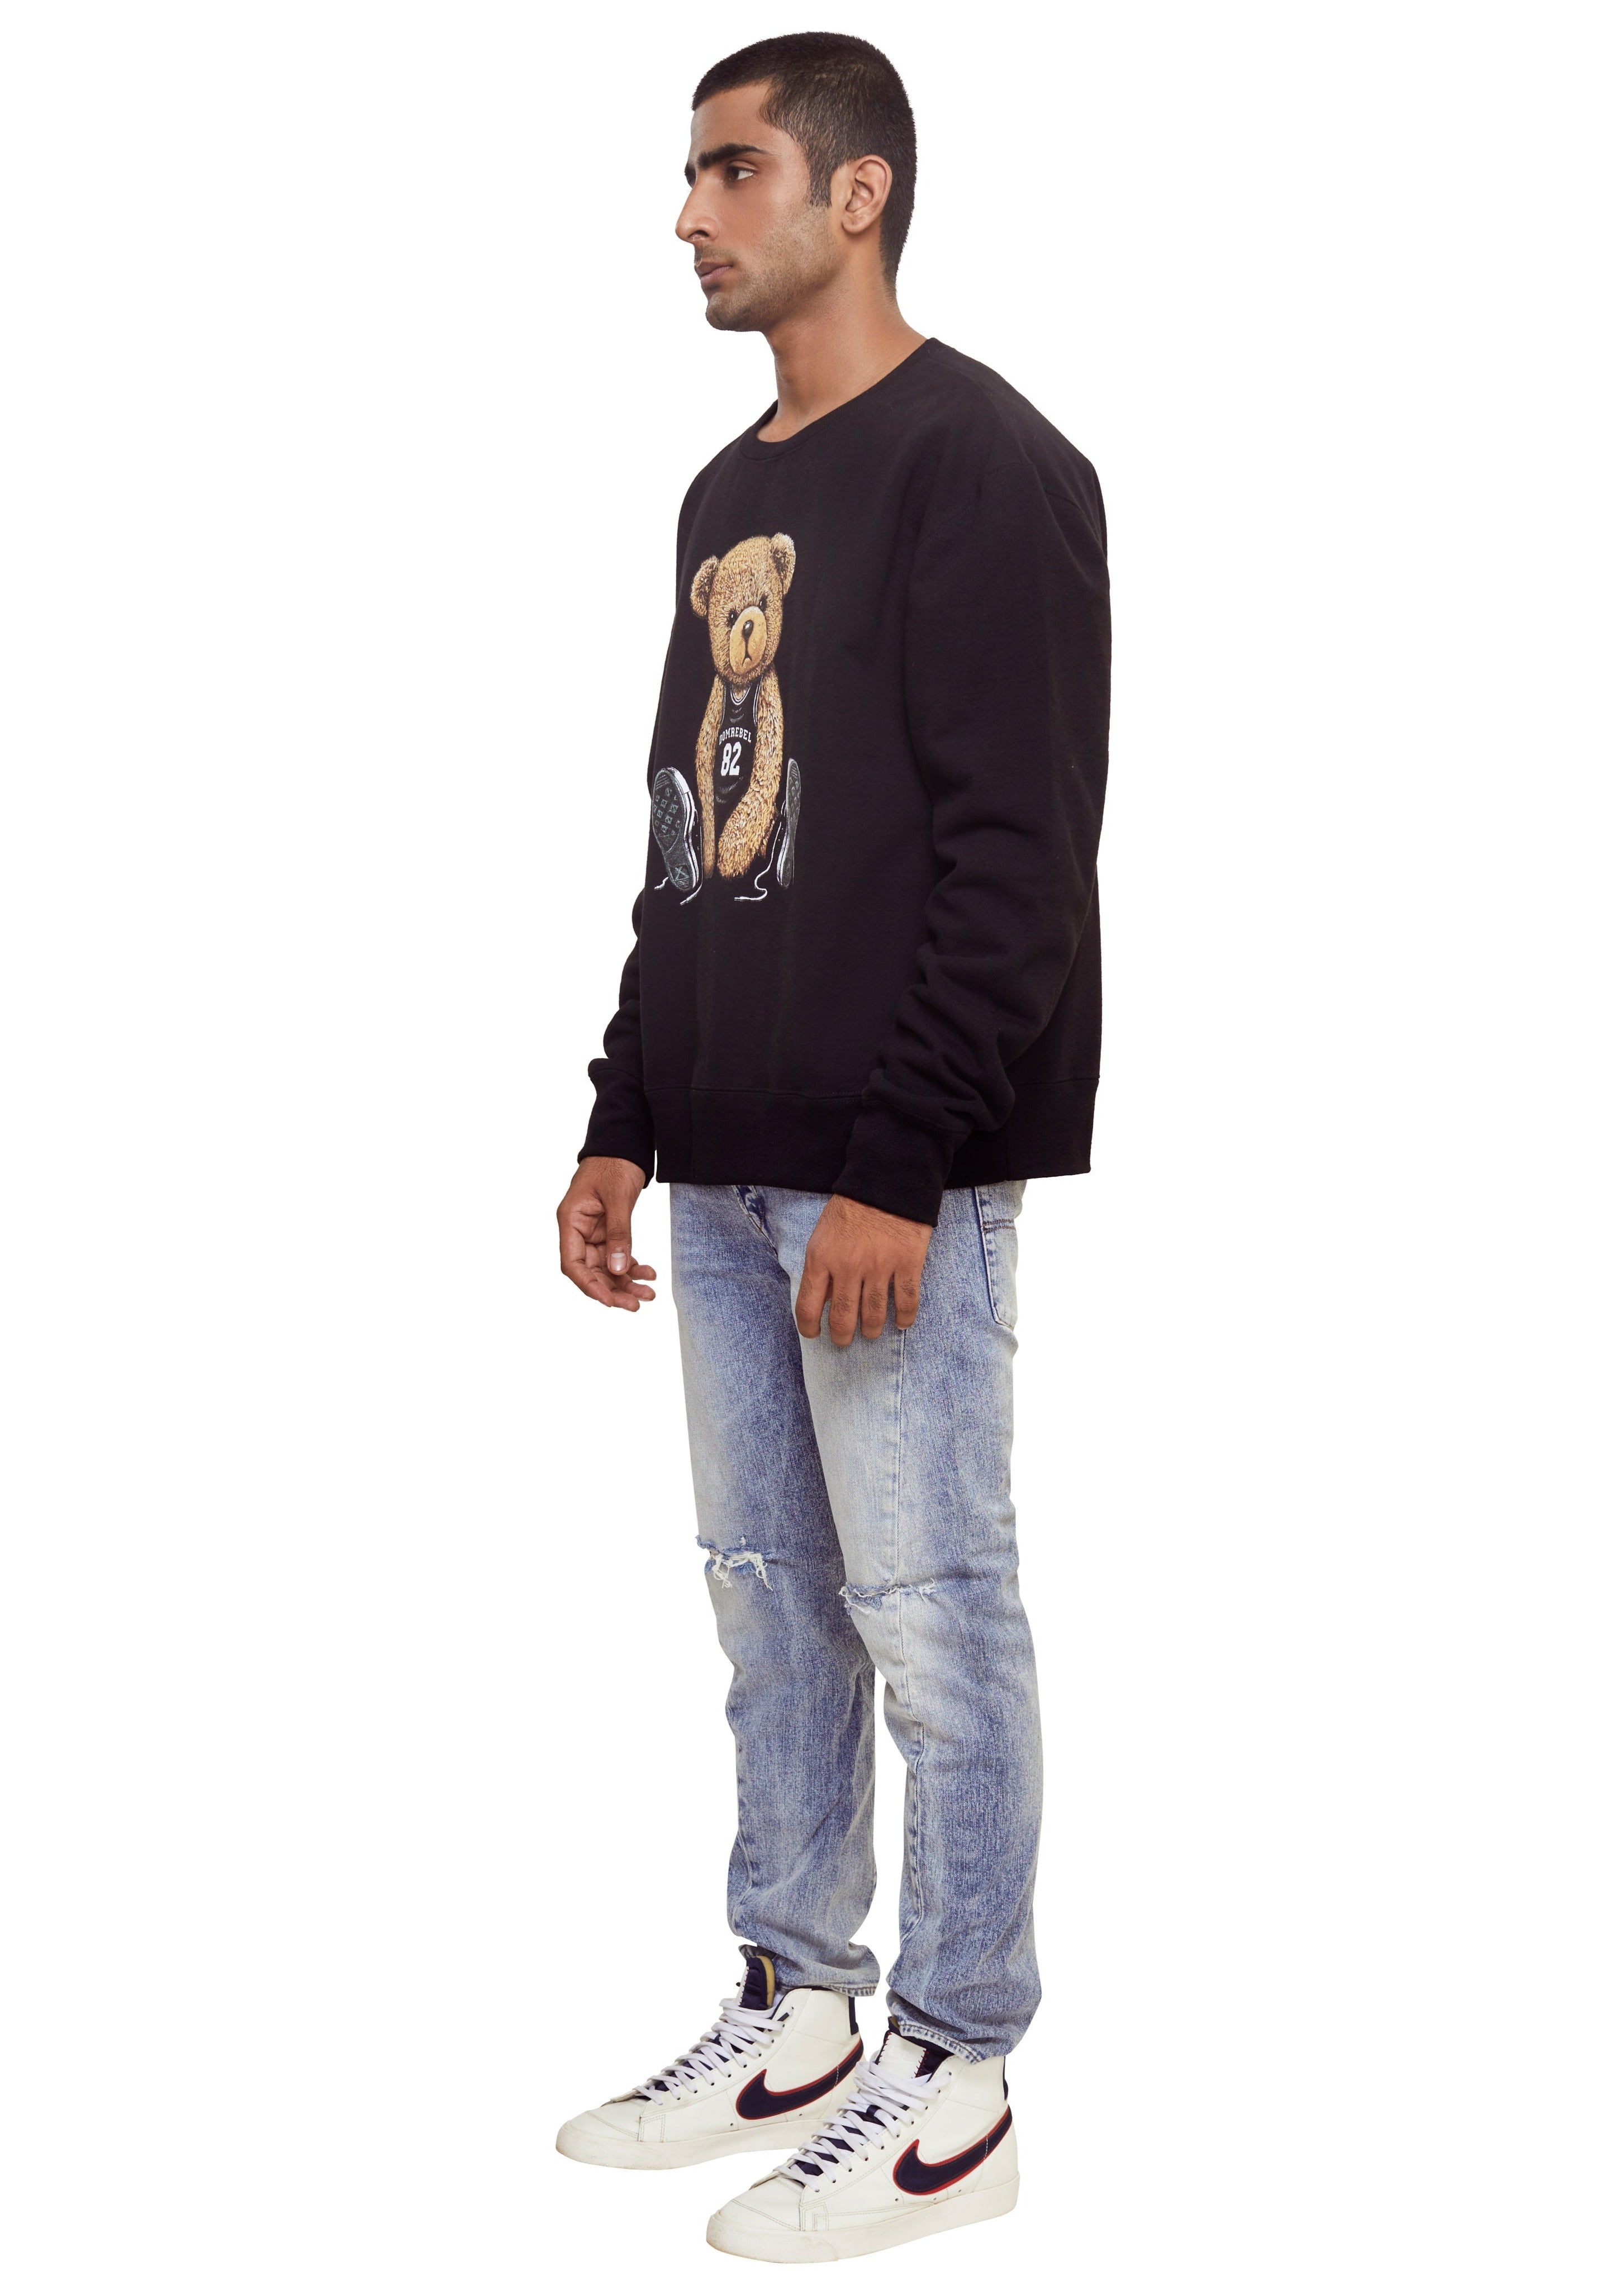 Black cotton ribbed detailed sweatshirt with a teddy bear print at the chest ,logo print to the rear with crew neck and long sleeves from the brand Domrebel